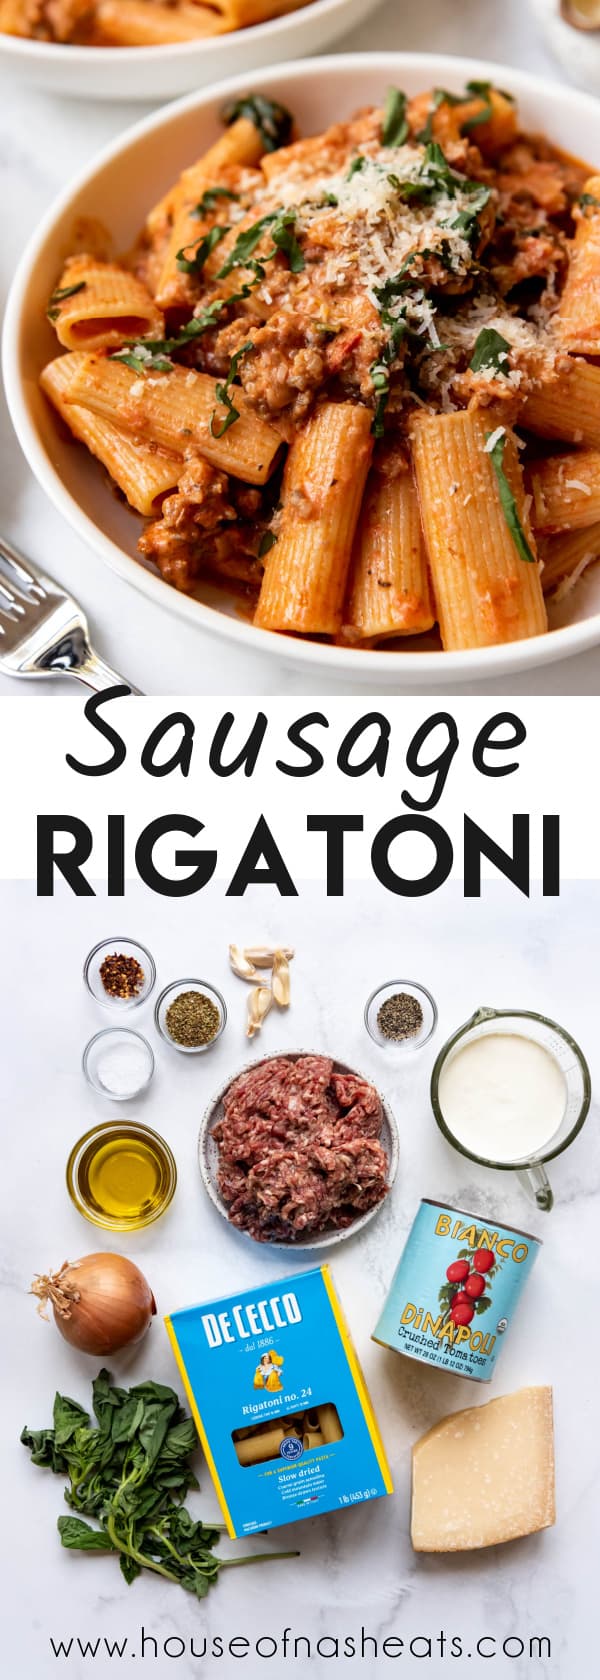 A collage of images of sausage rigatoni with the ingredients for making it and text overlay.